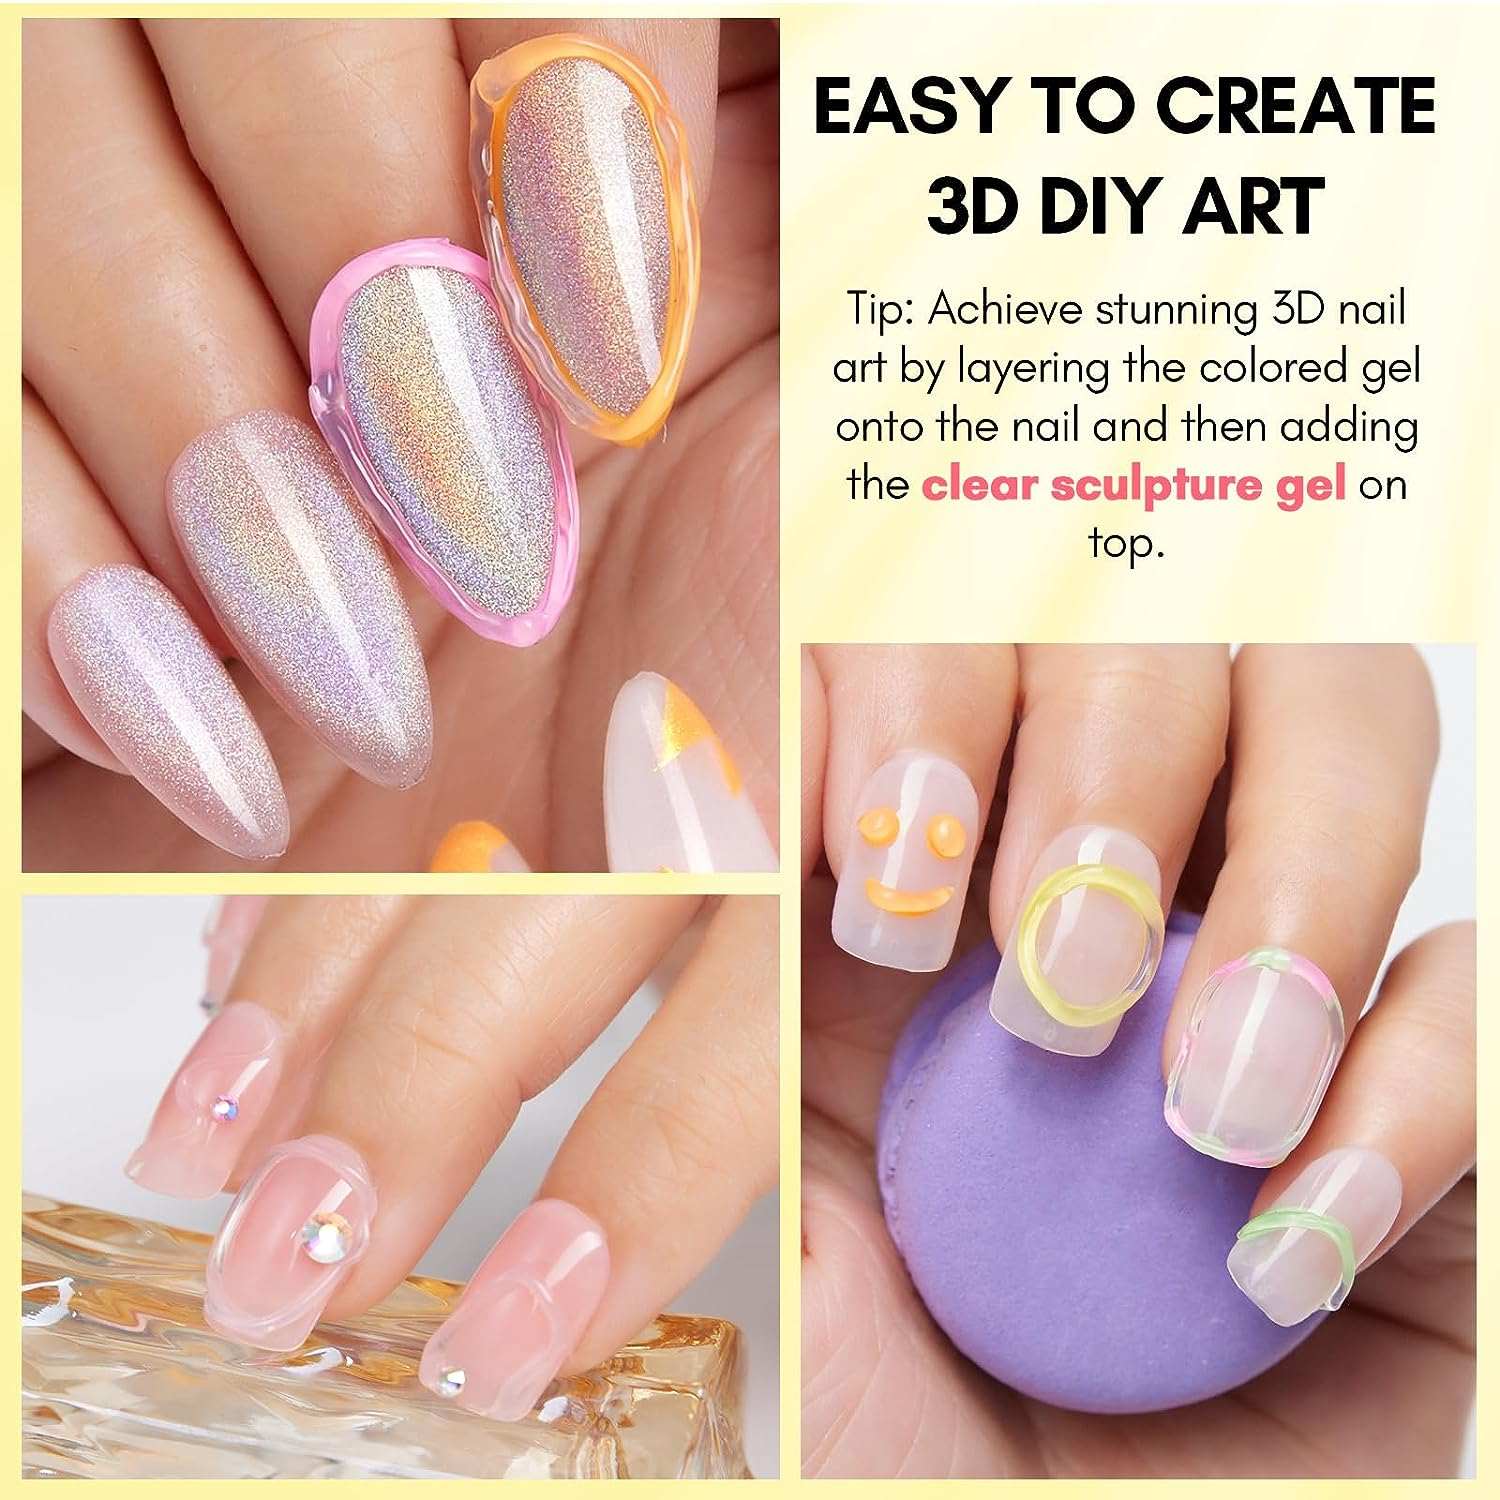 3d Nail art and manicures. | Castroville CA